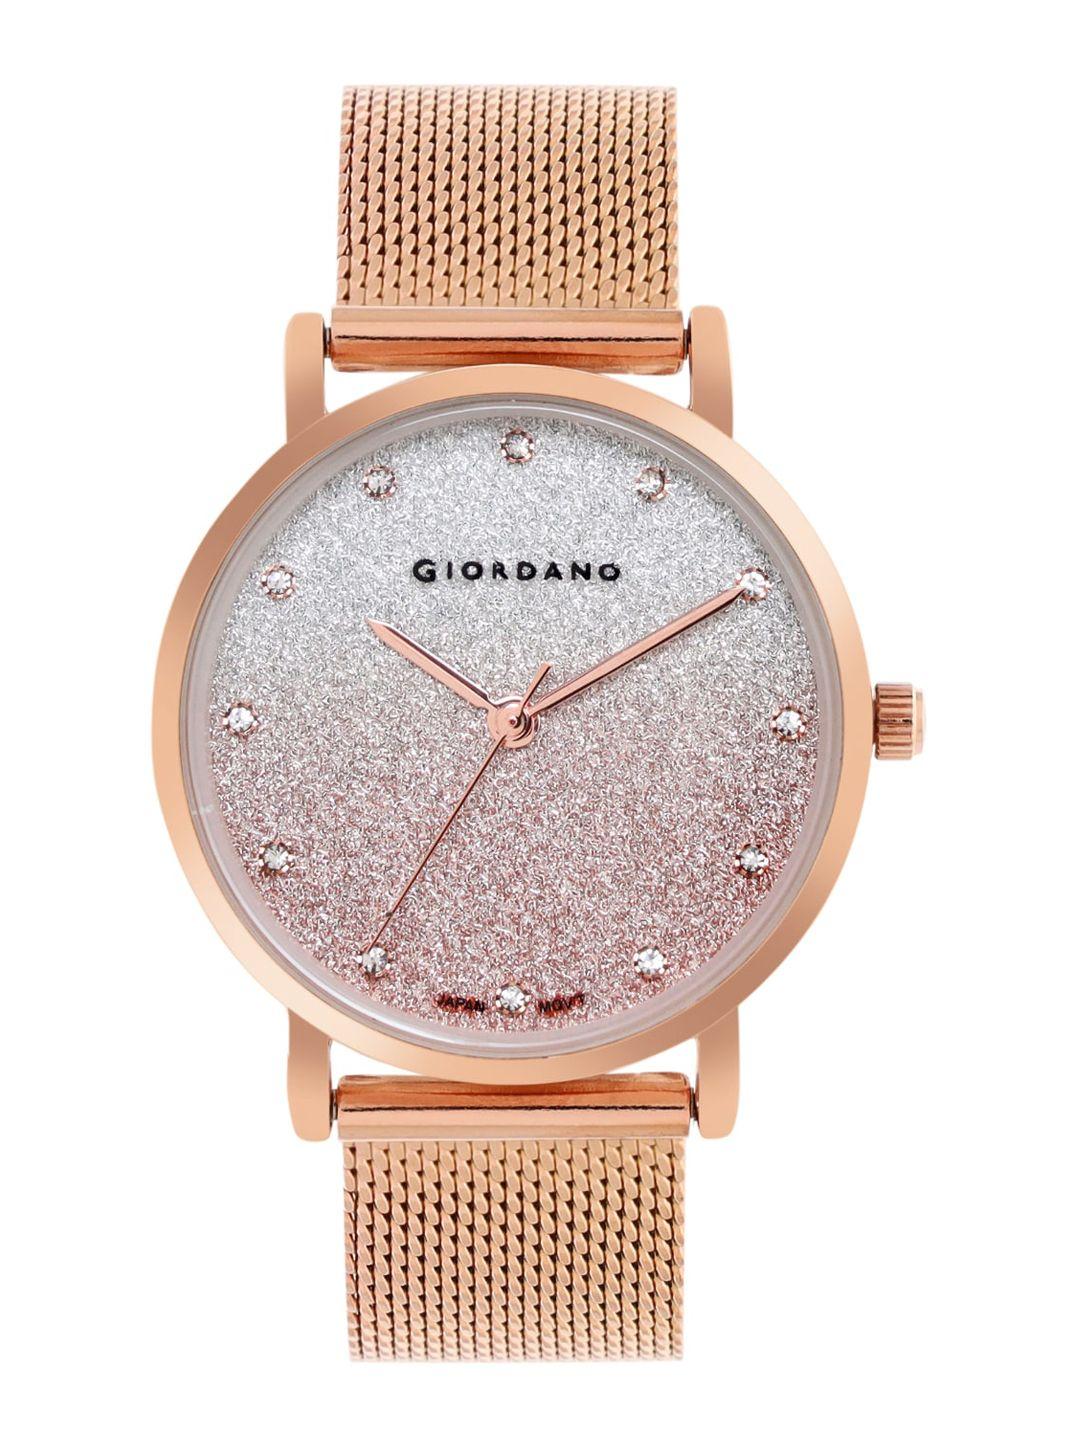 giordano-women-rose-gold-toned-embellished-dial-analogue-watch-gd-60005